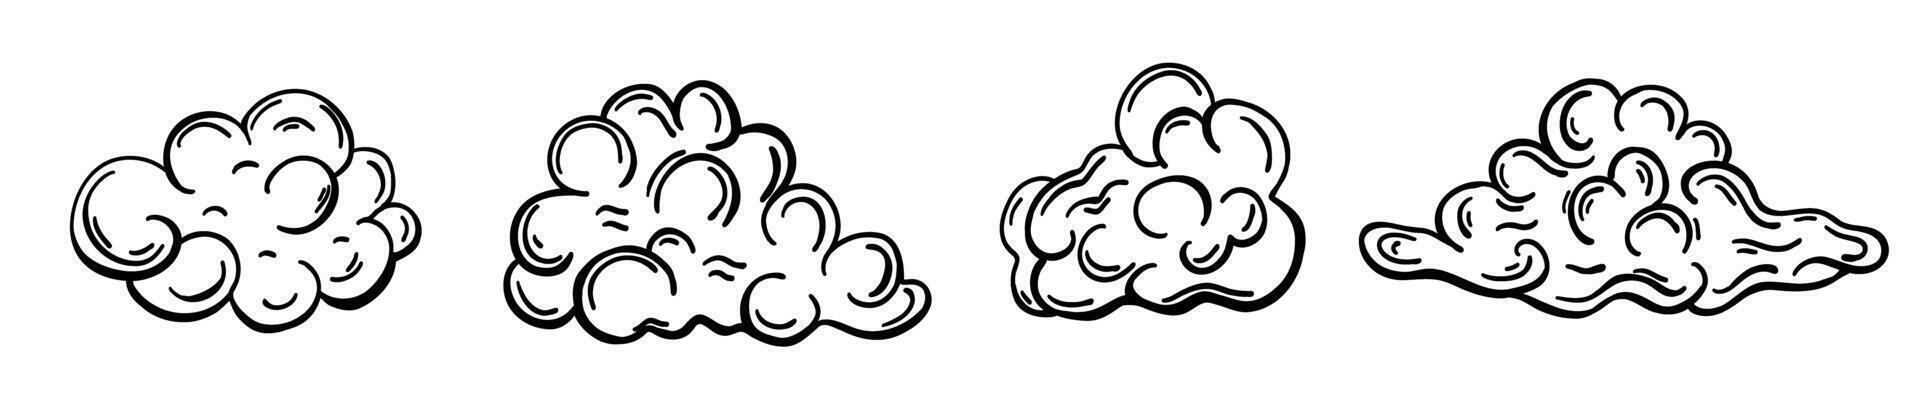 Set with doodle clouds vector